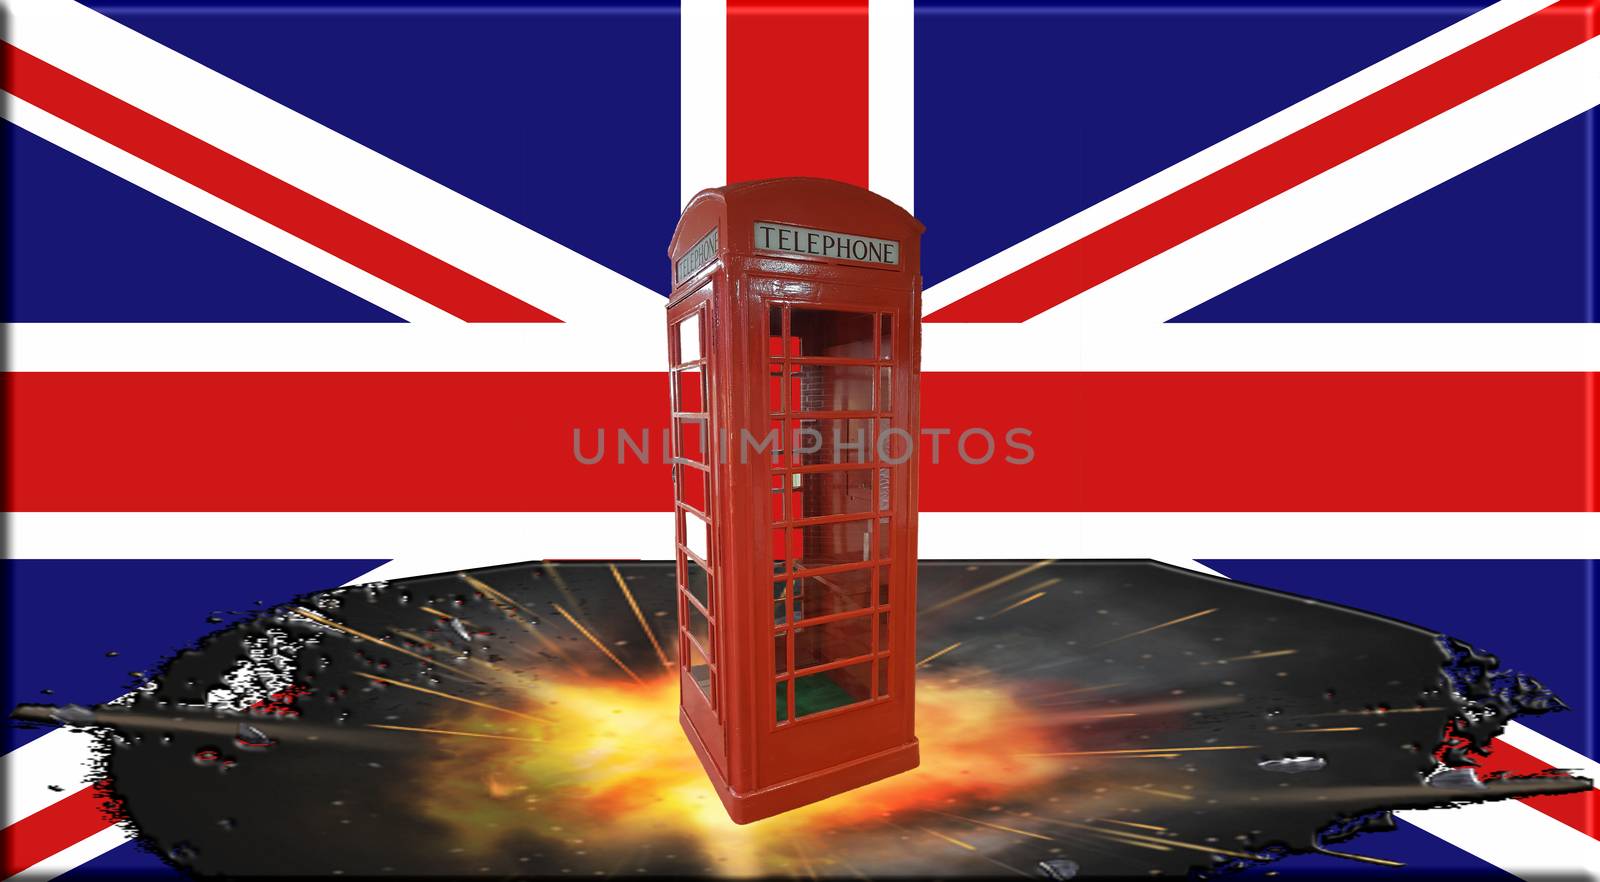  British Red Telephone Box in front of Union Jack     by JFsPic